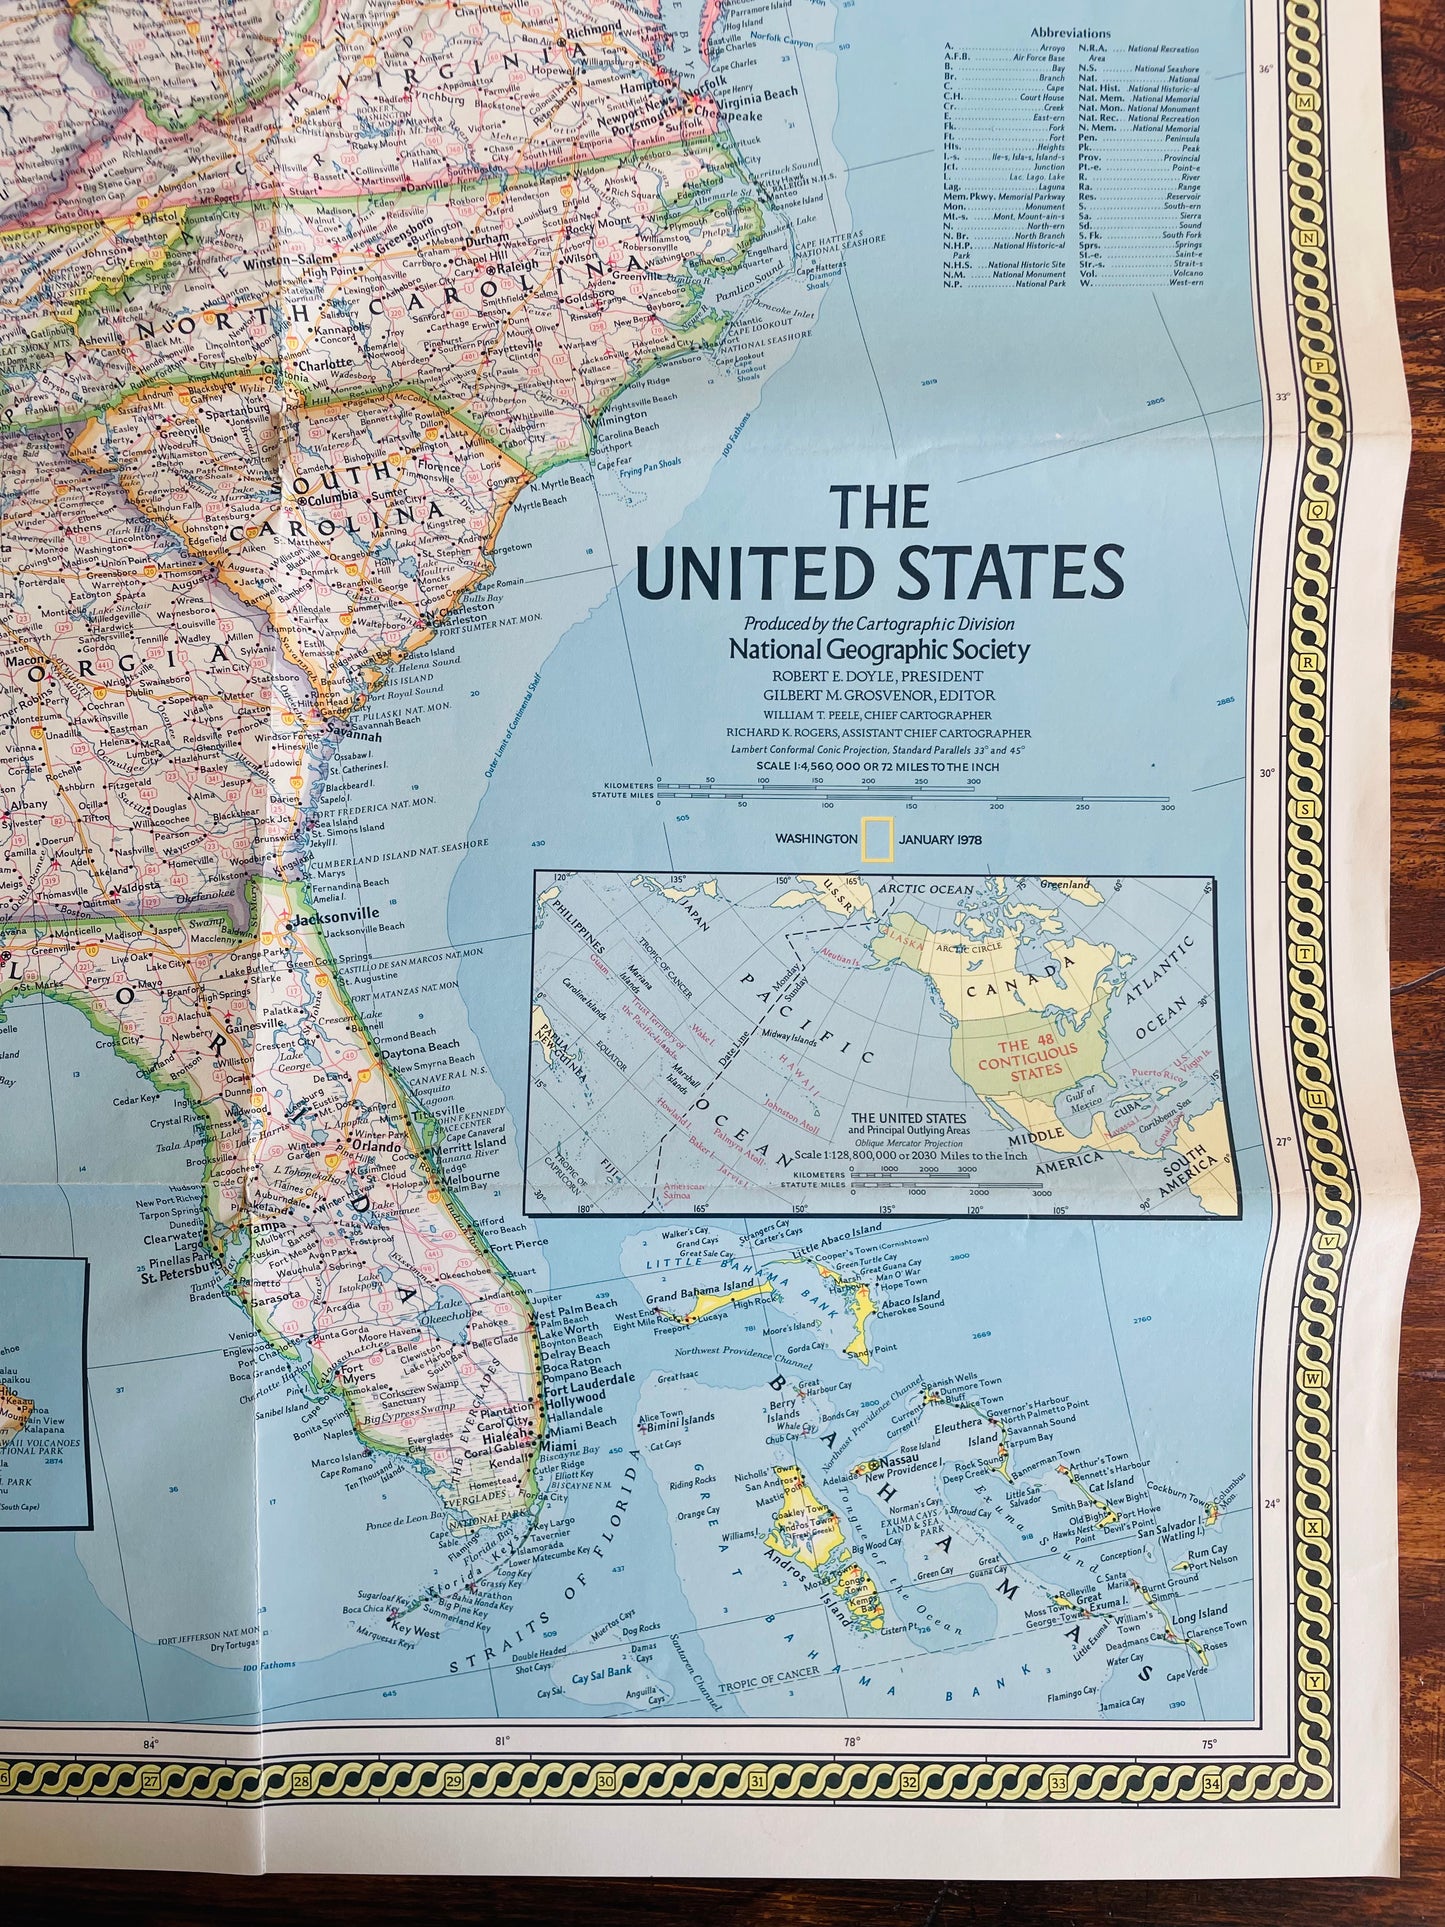 January 1978 National Geographic Giant USA Wall Map